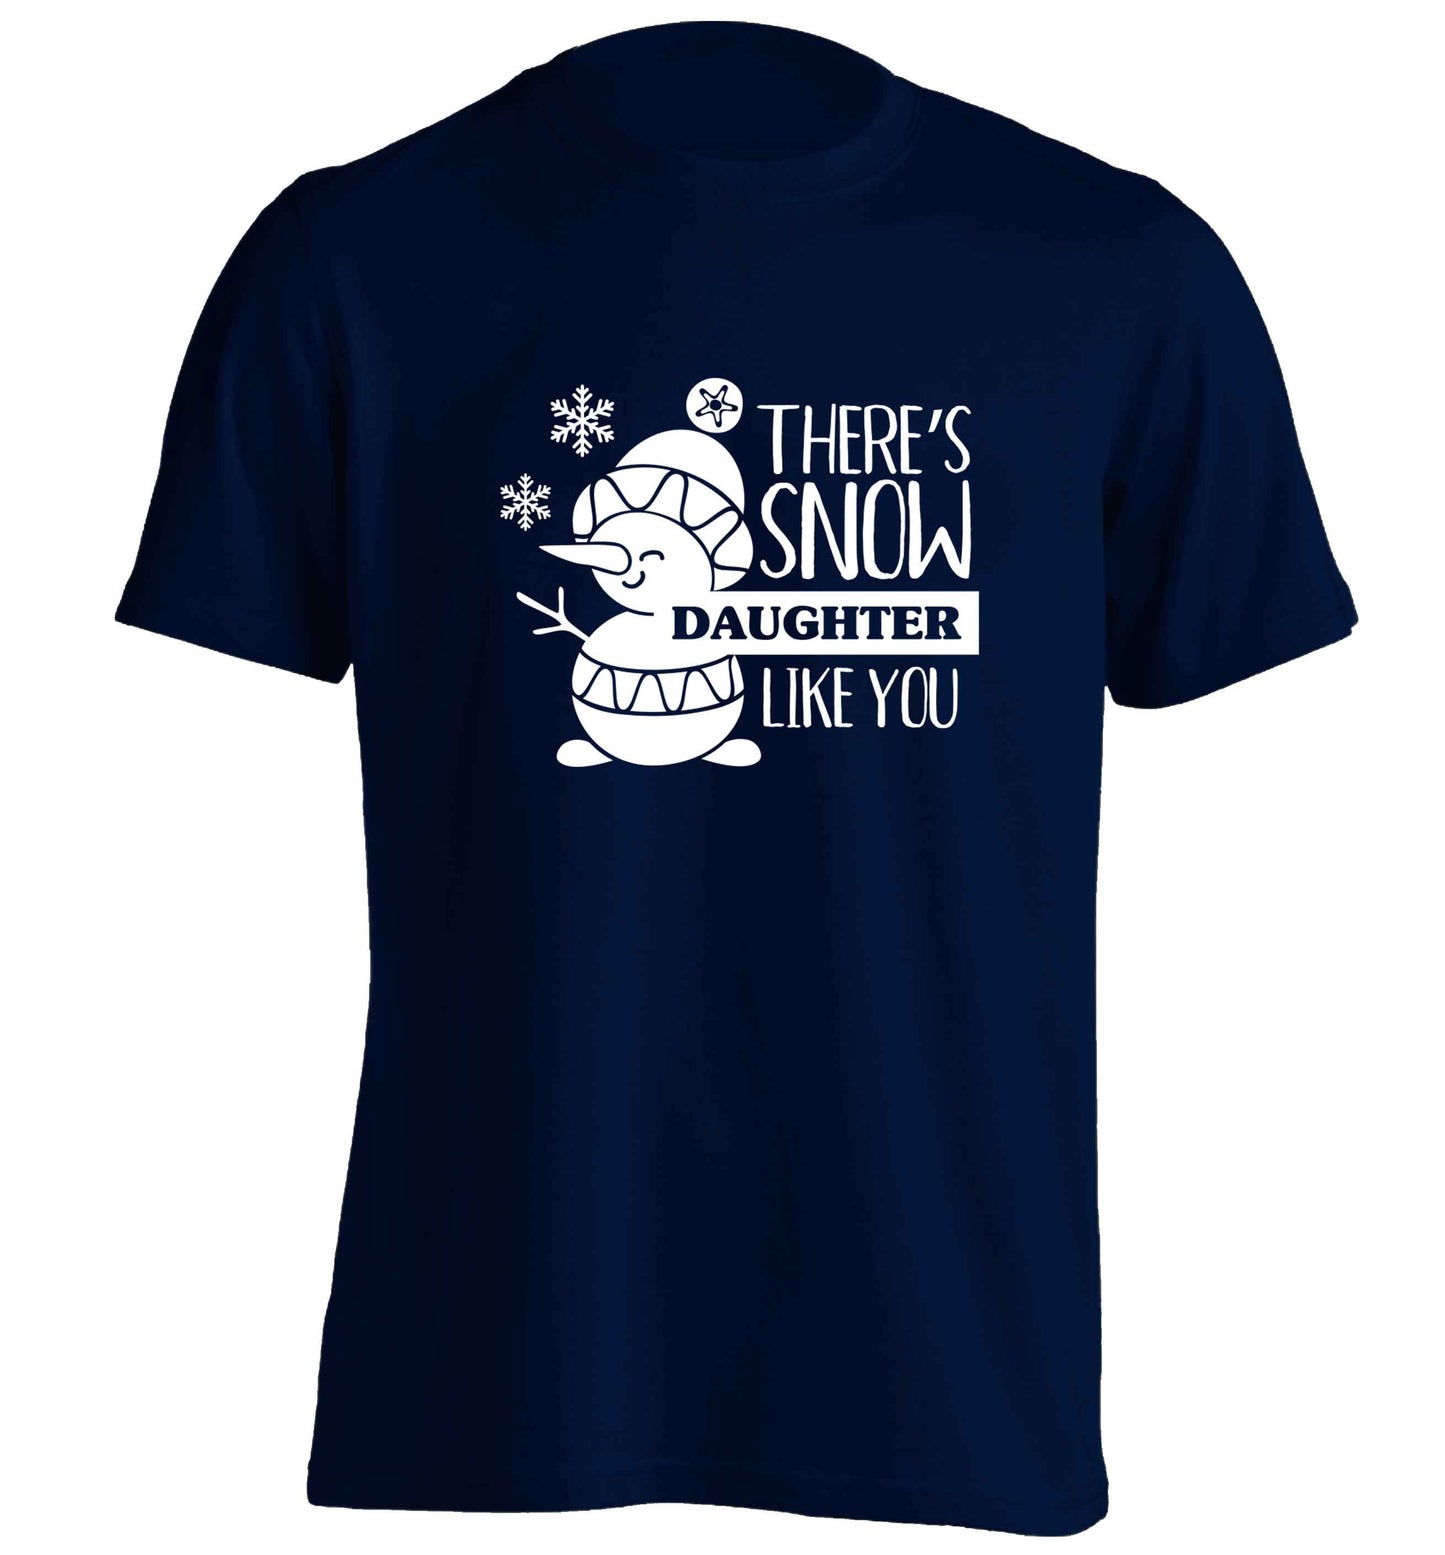 There's snow daughter like you adults unisex navy Tshirt 2XL